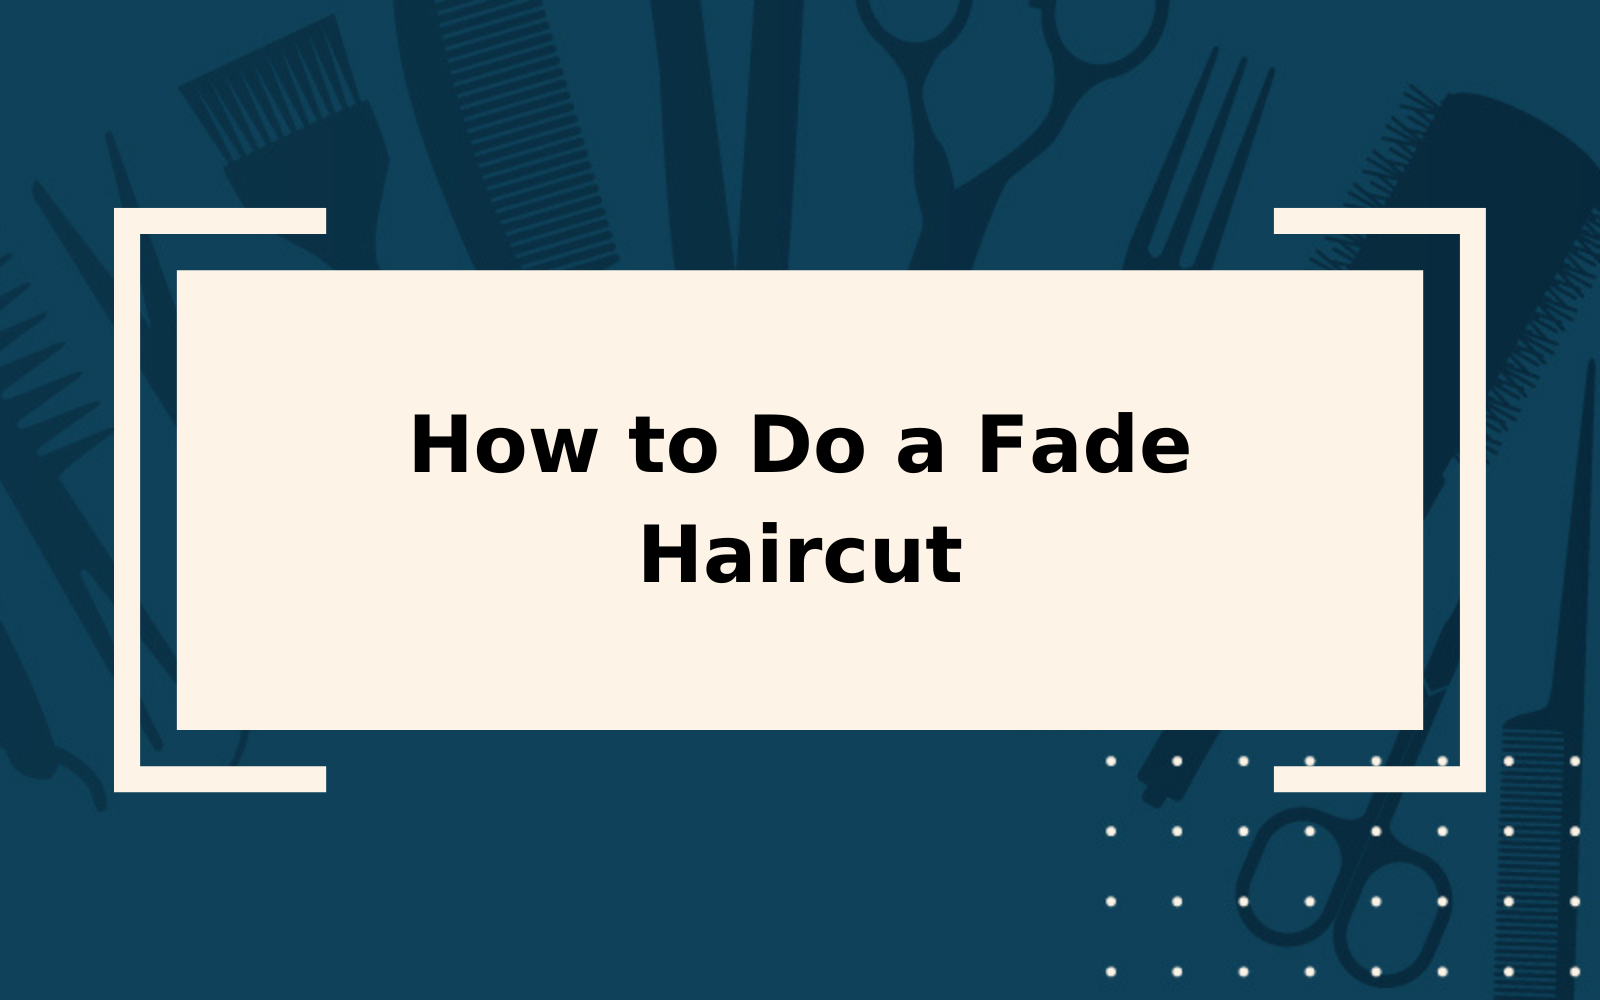 How to Do a Fade Haircut | Step-by-Step Guide